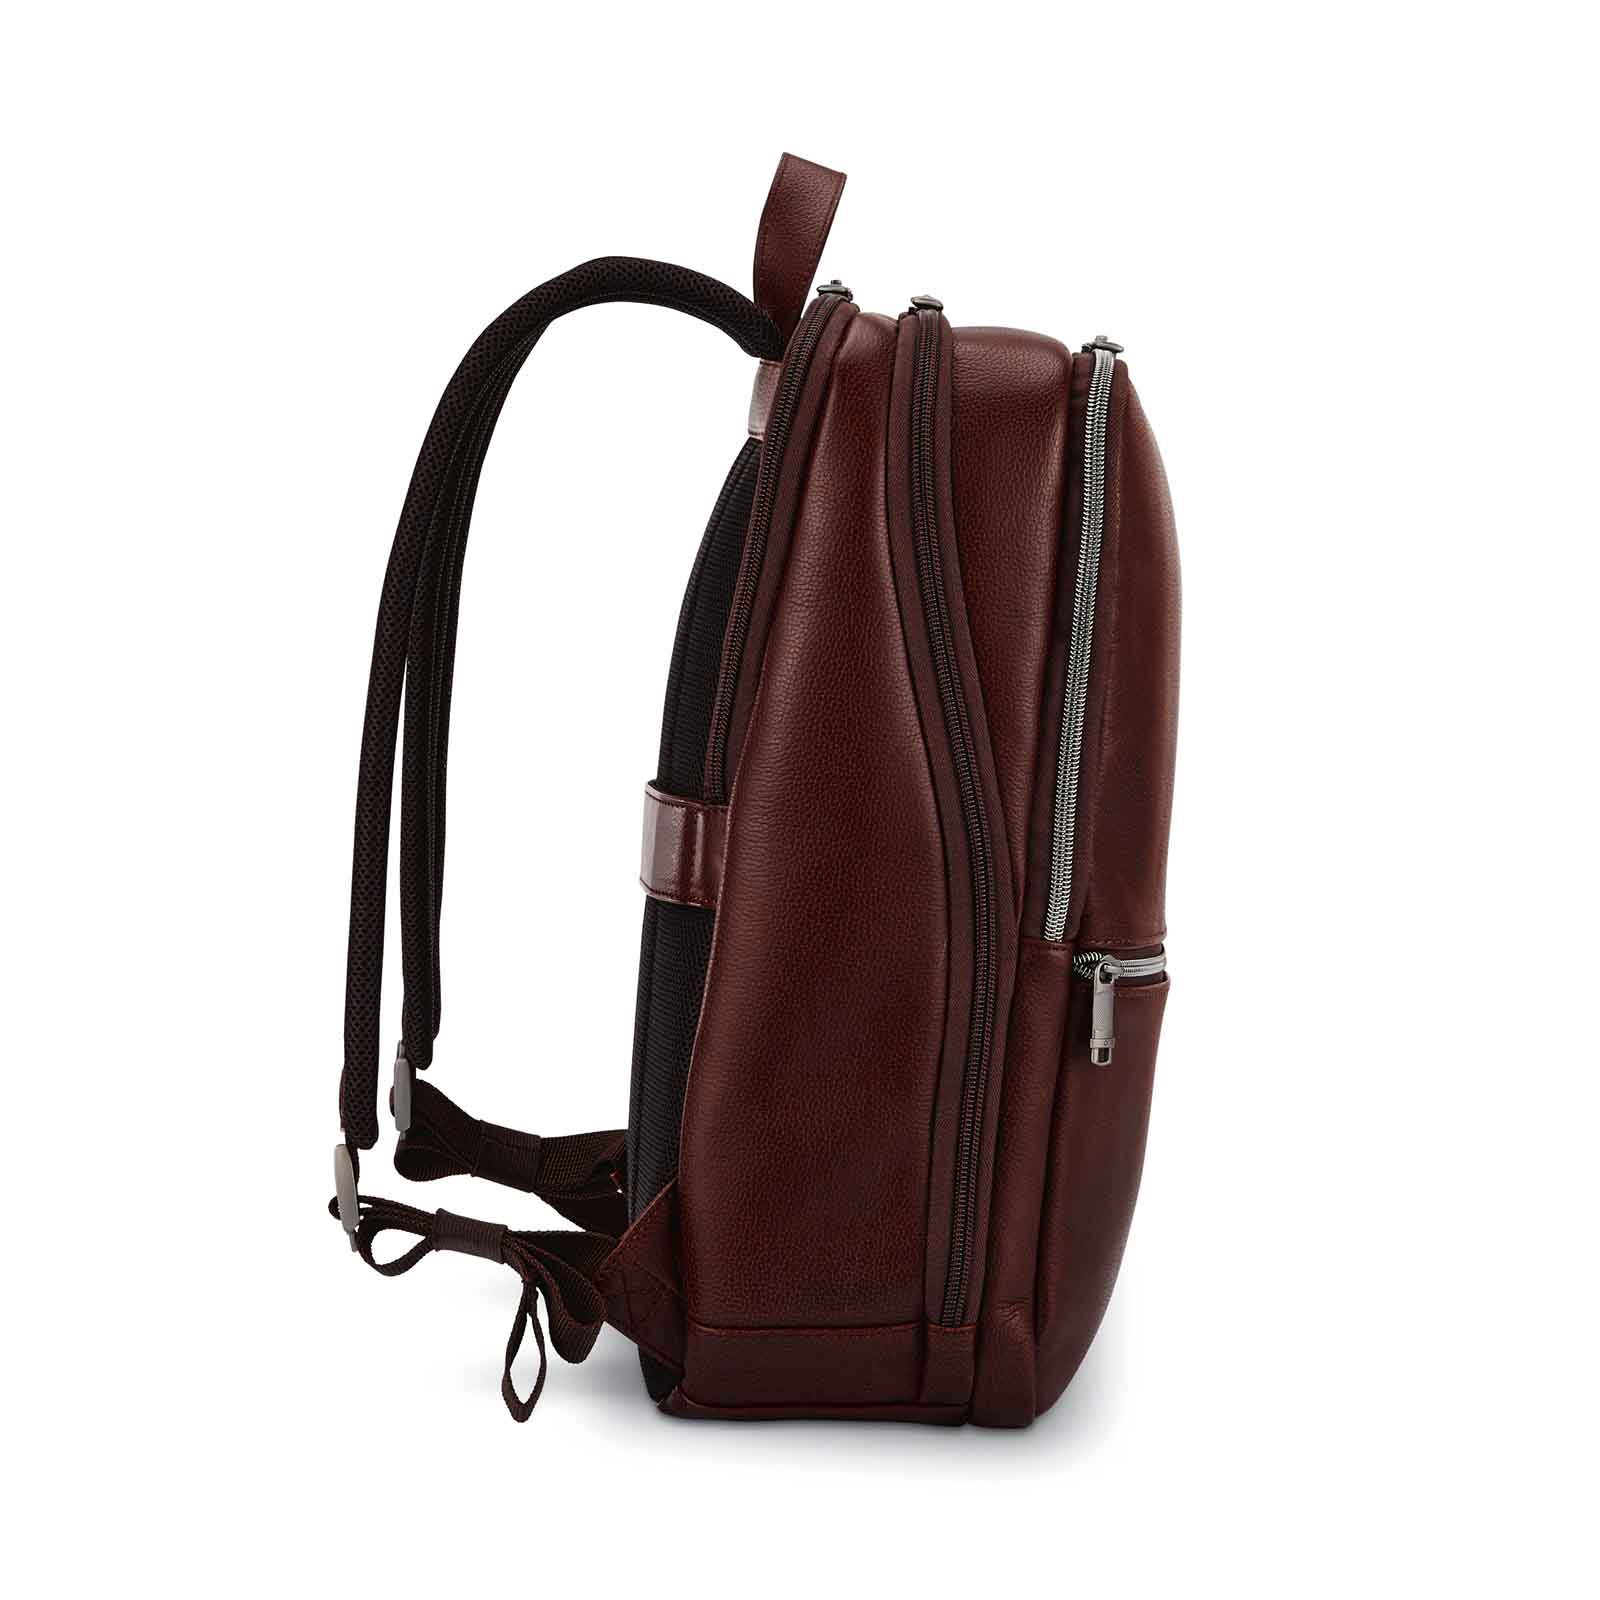 Samsonite-Classic-Leather-14-Inch-Laptop-Backpack-Mahogany-Side